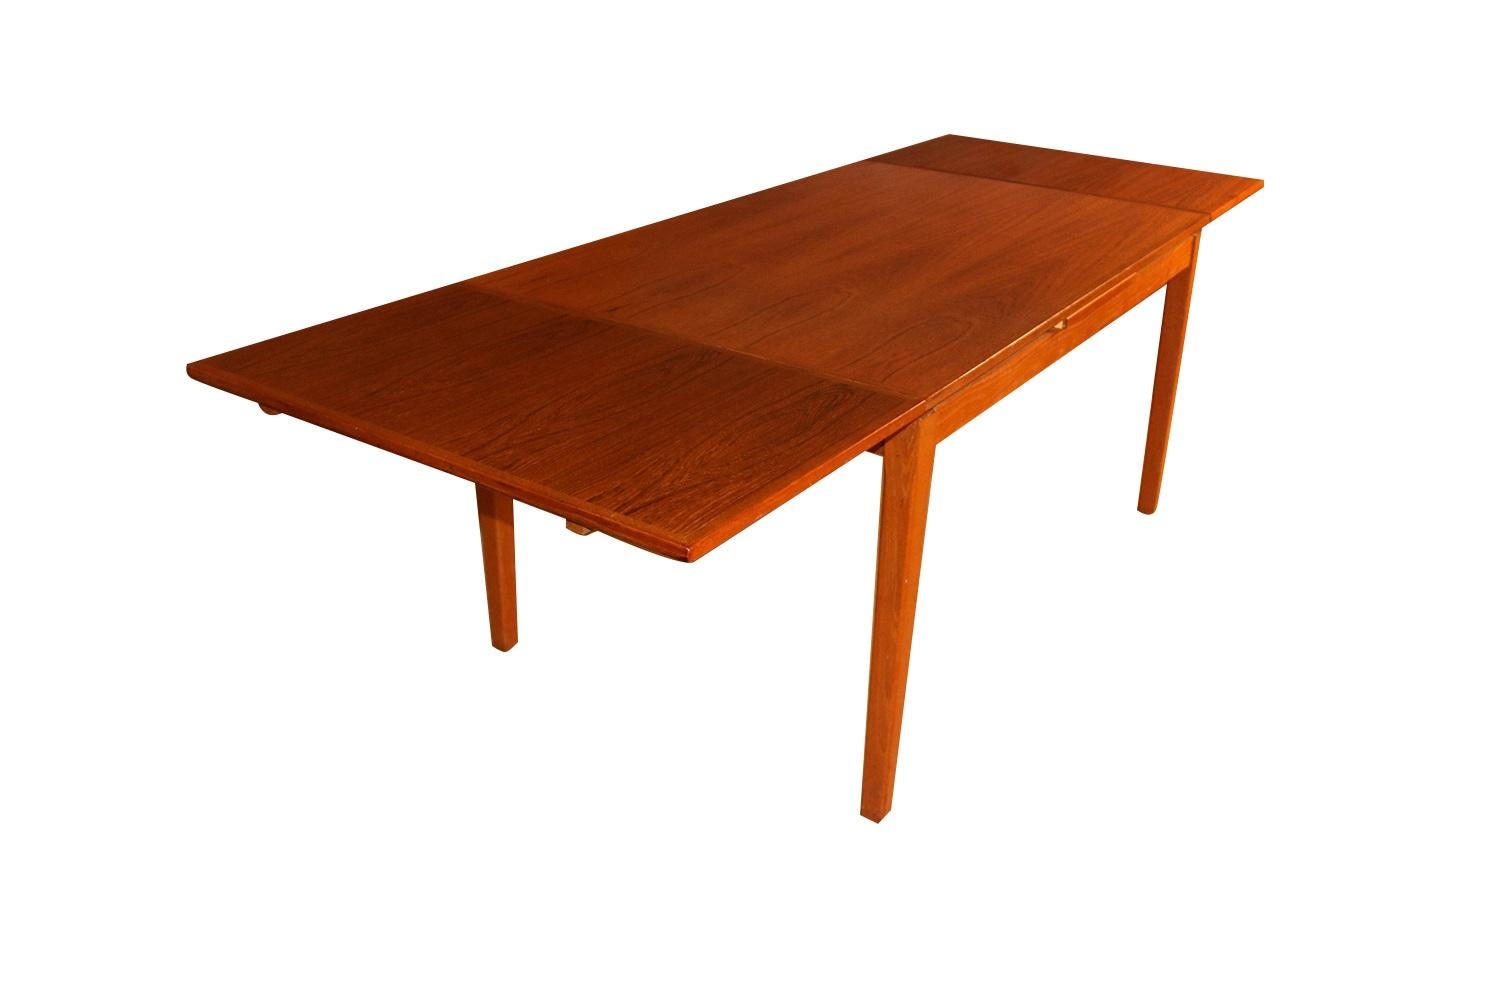 Exceptional Danish modern teak extension dining table produced by H. Sigh & Son’s Mobelfabrik in Denmark. This gorgeous Danish teak extending dining table remains in original good condition throughout. With an initial medium footprint, this table